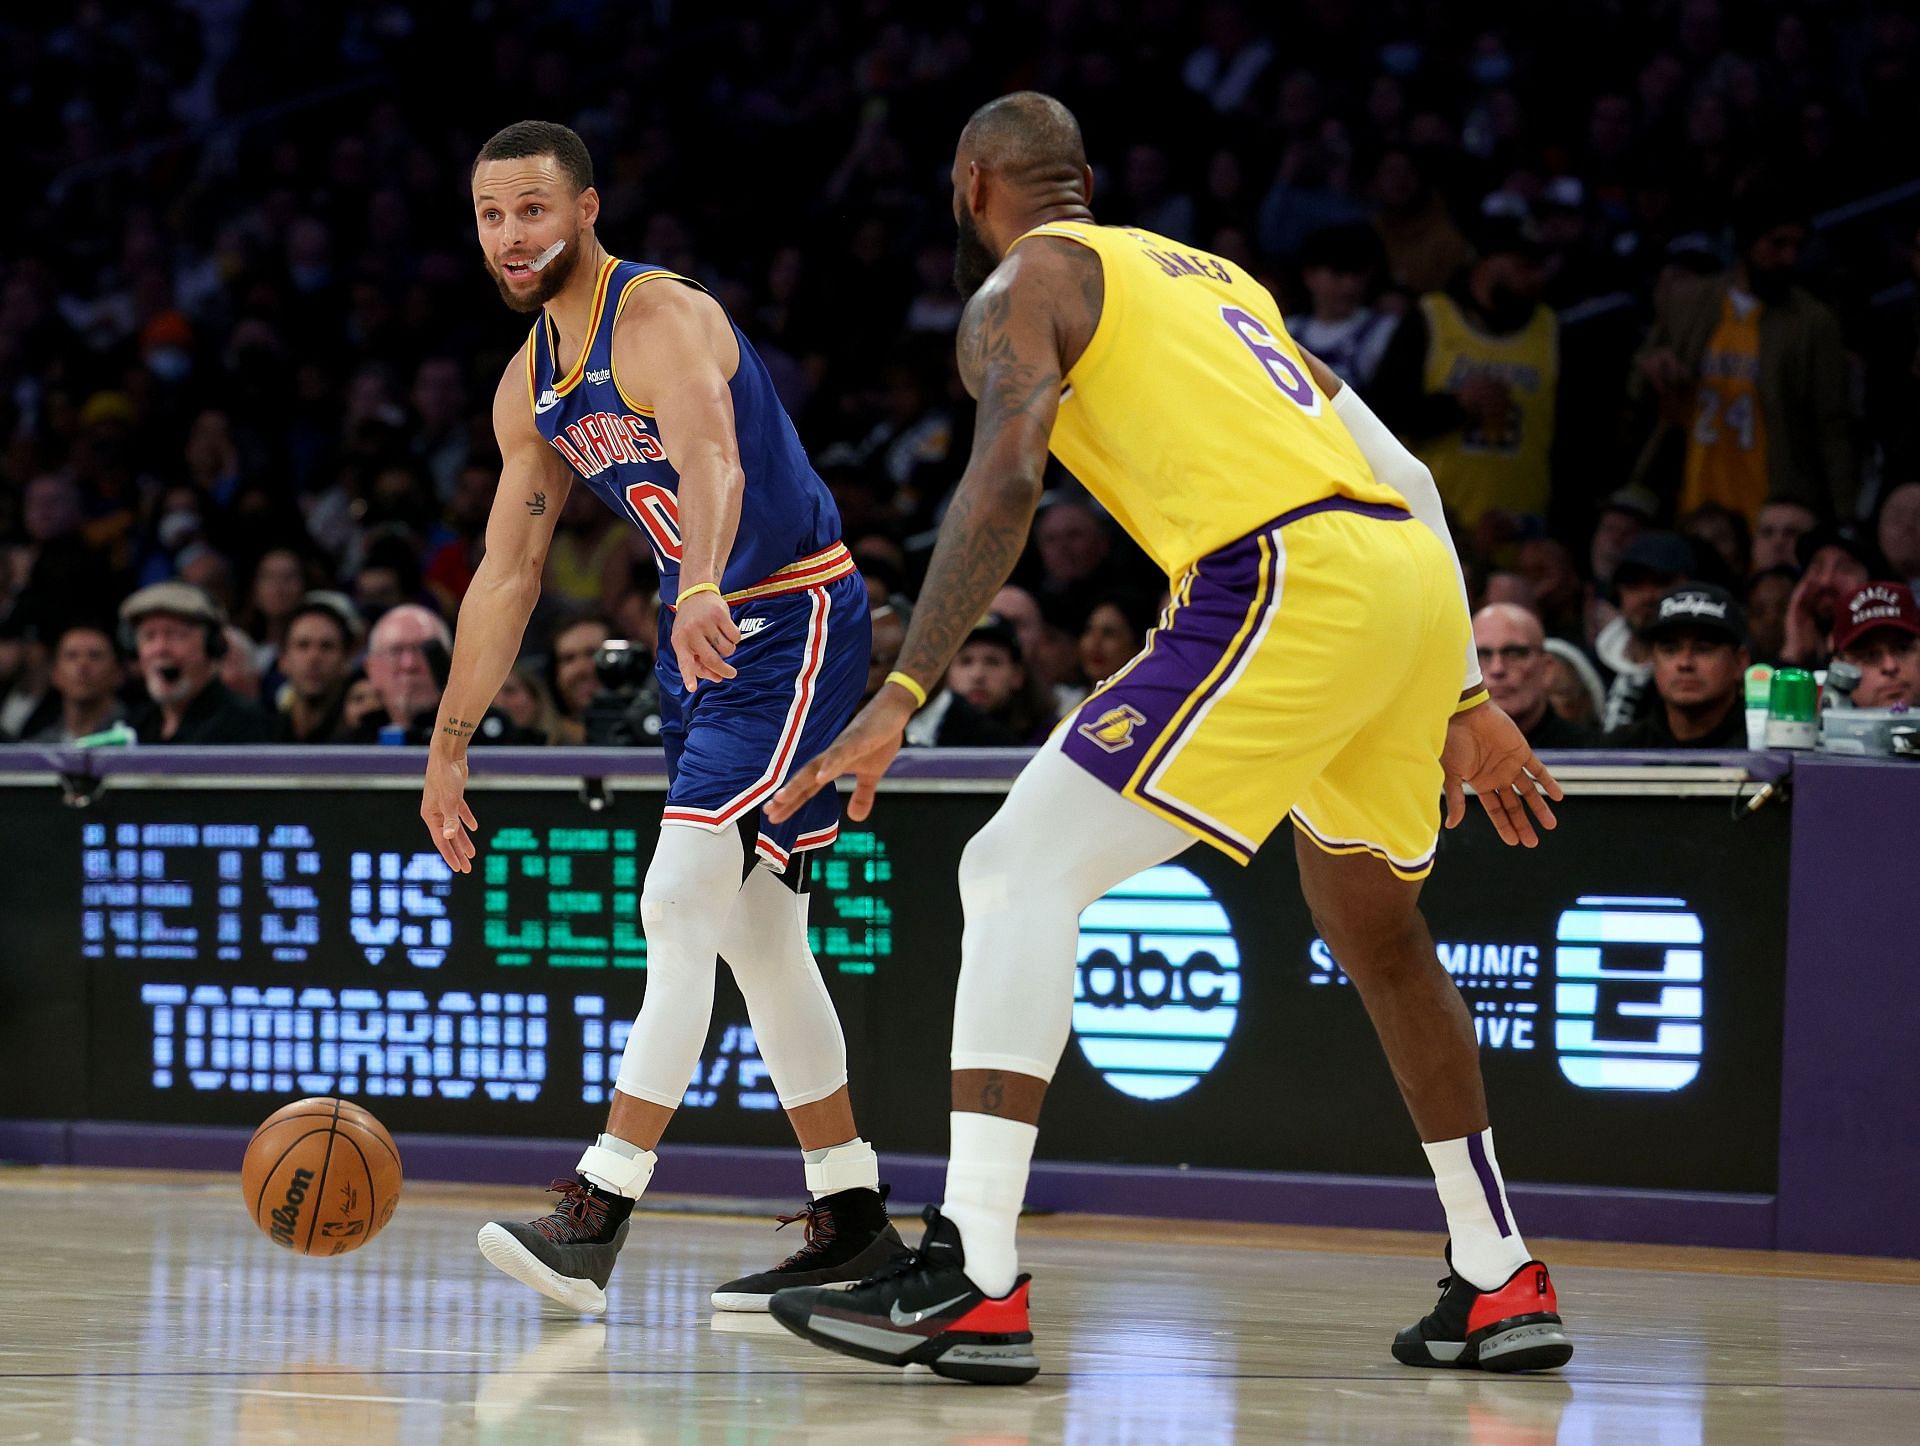 LeBron James guards Steph Curry (Golden State Warriors vs. LA Lakers)